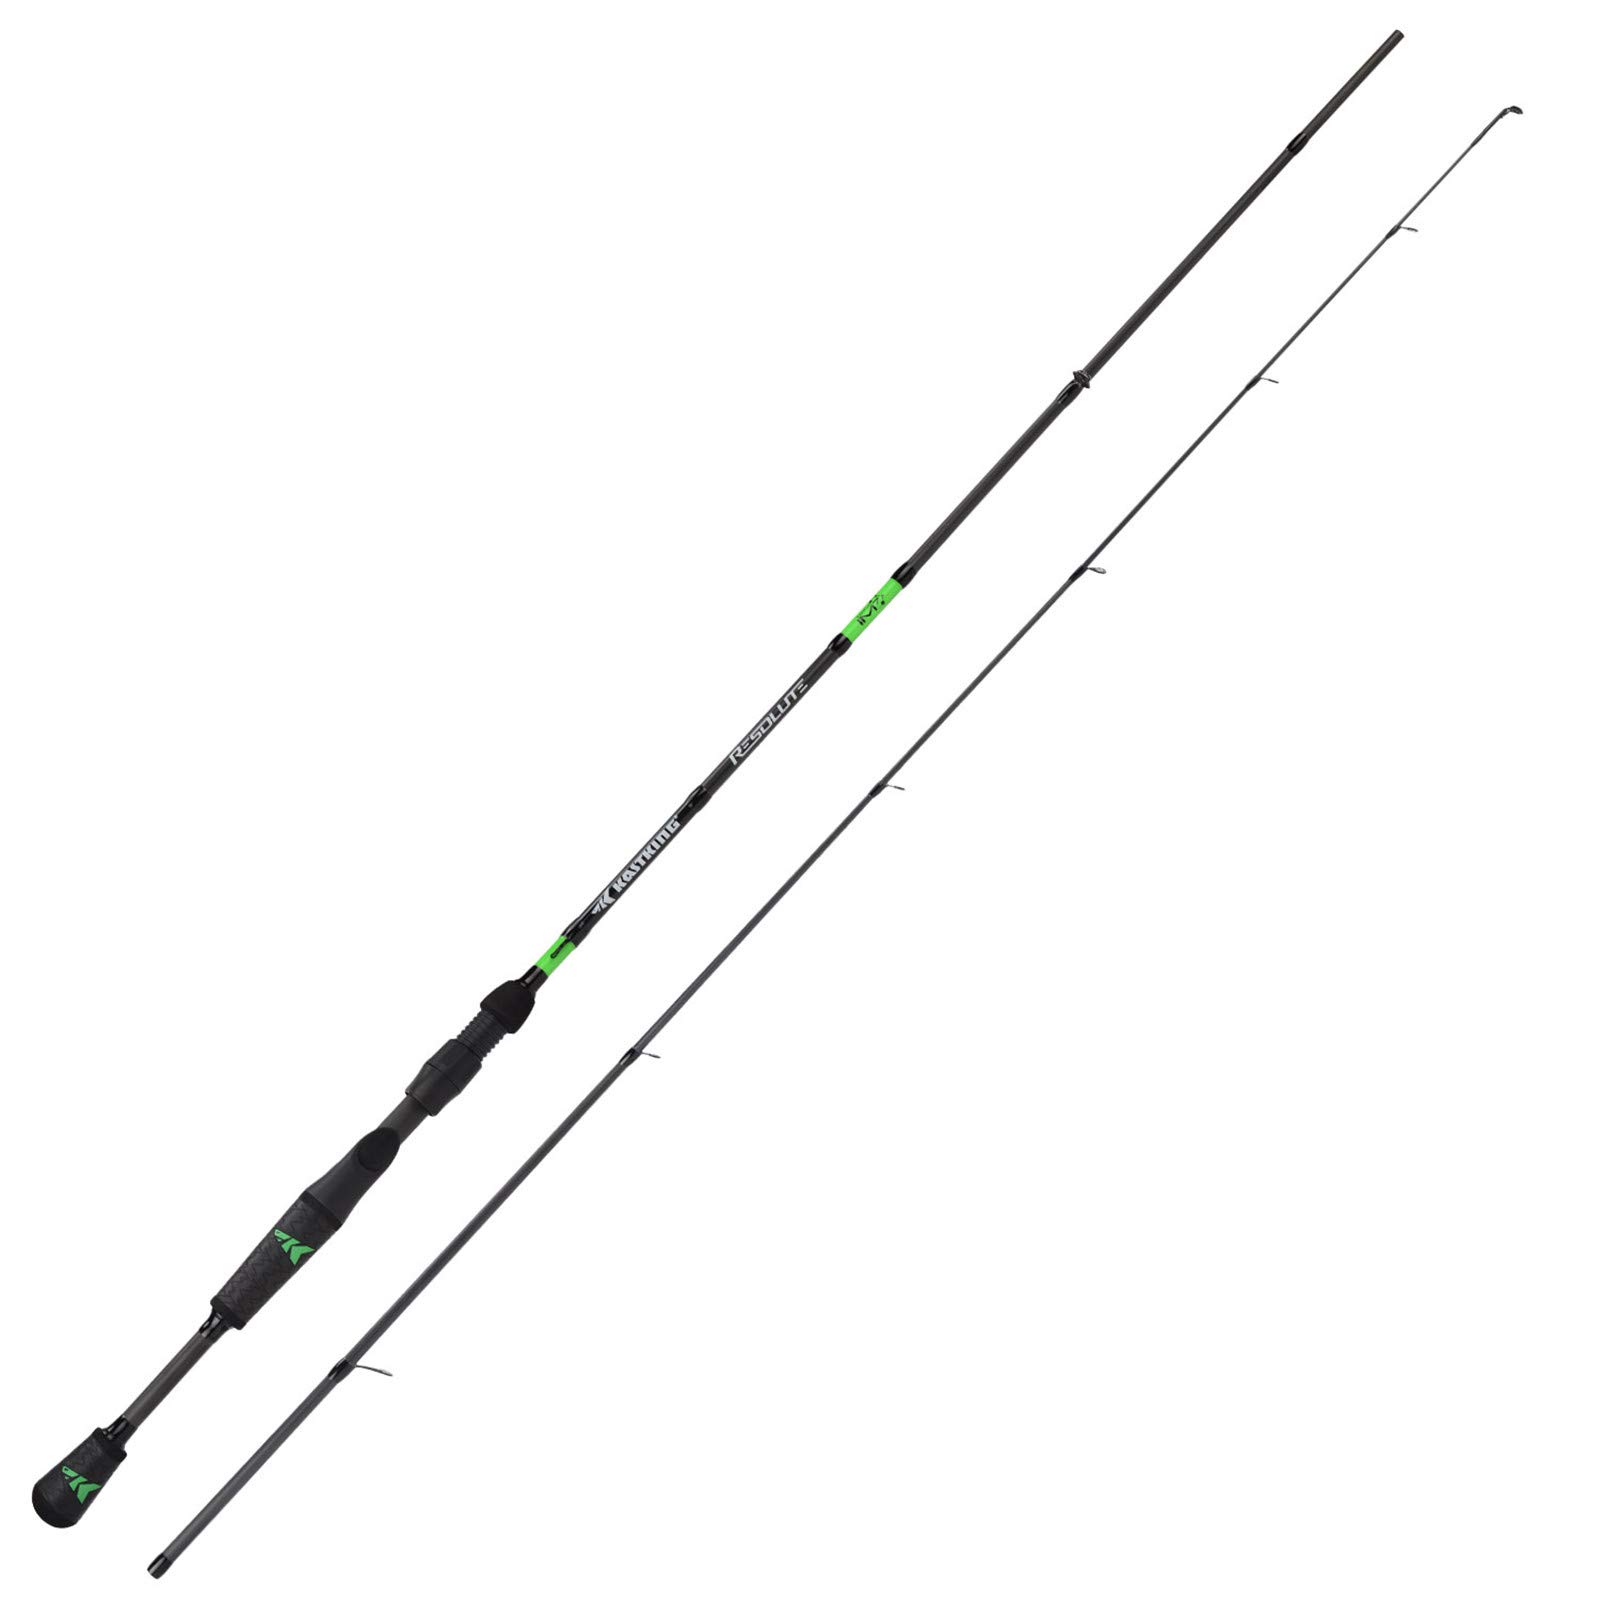 KastKing Resolute Fishing Rods, Spinning Rods & Casting Rods